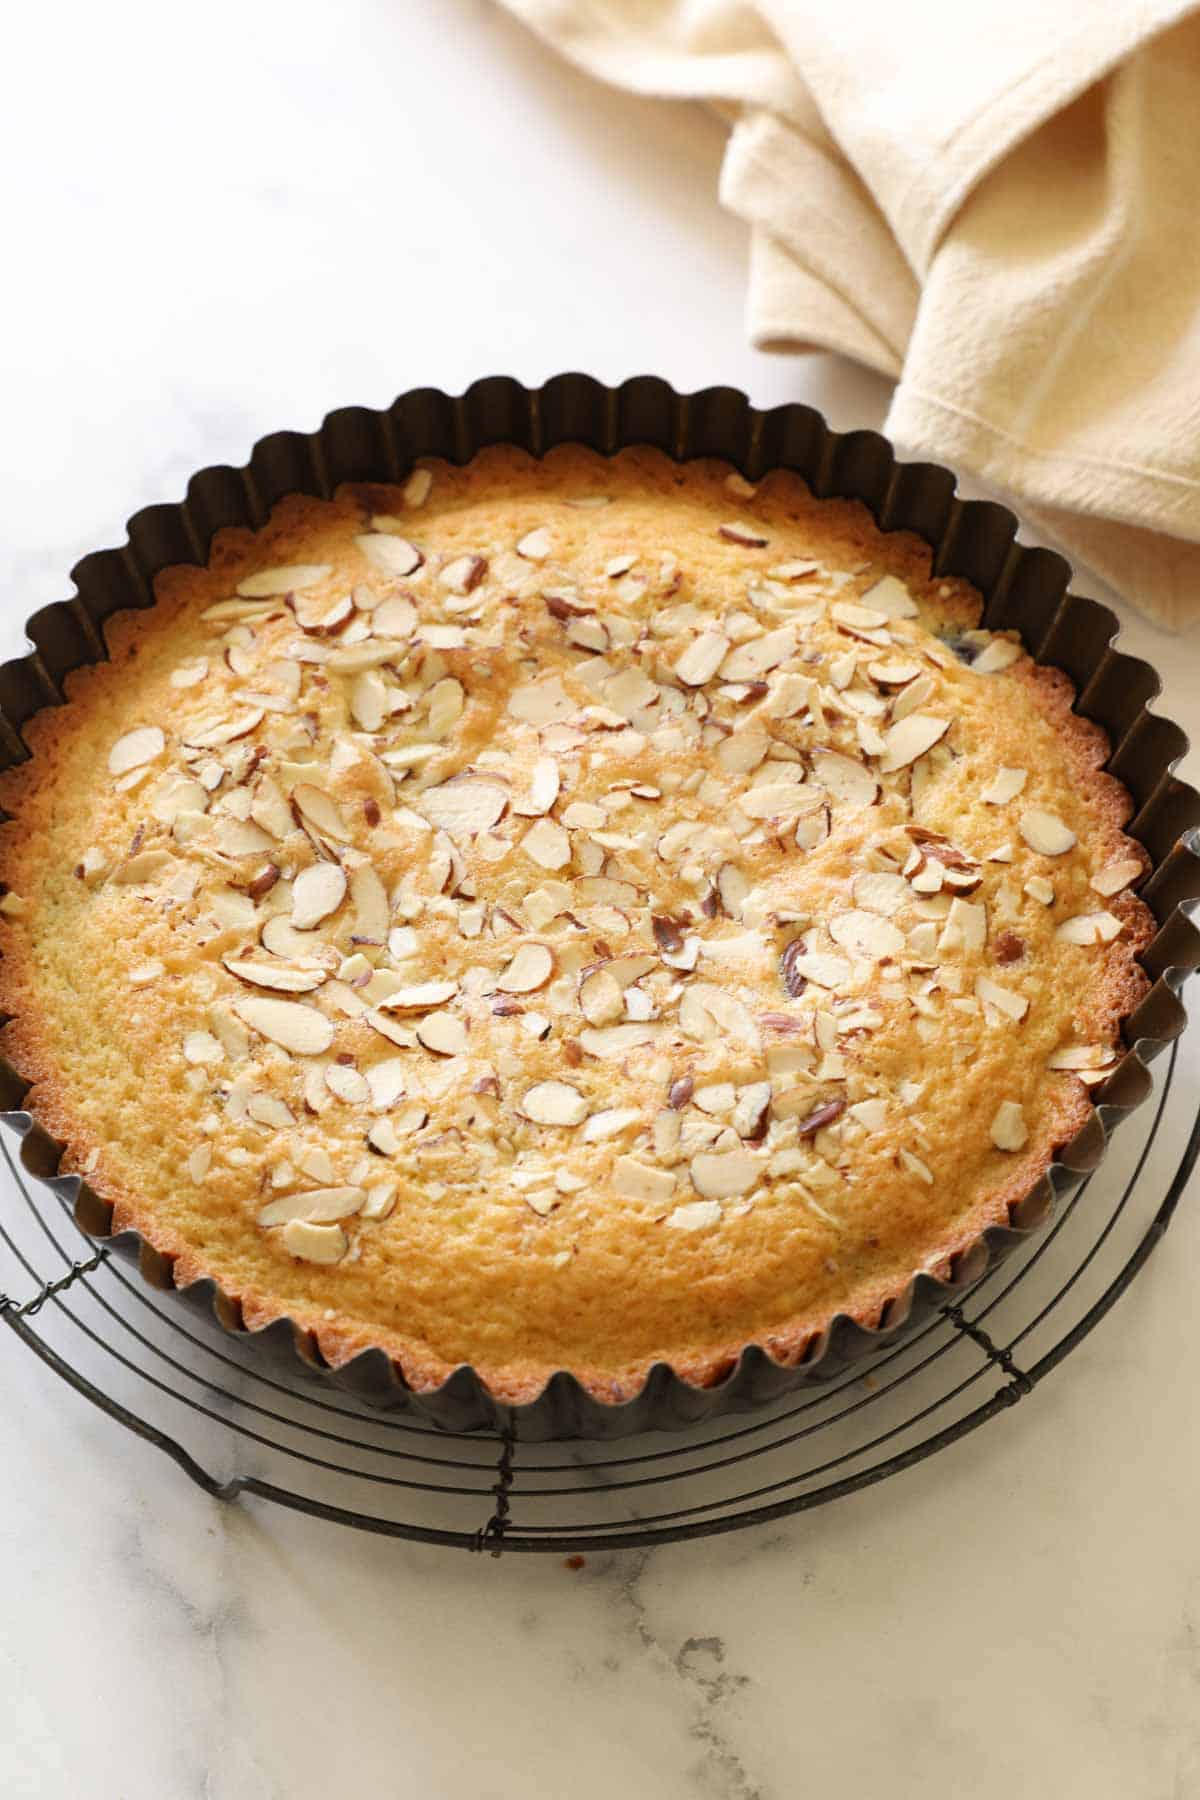 a cake with almonds on top cooling in a tart tin